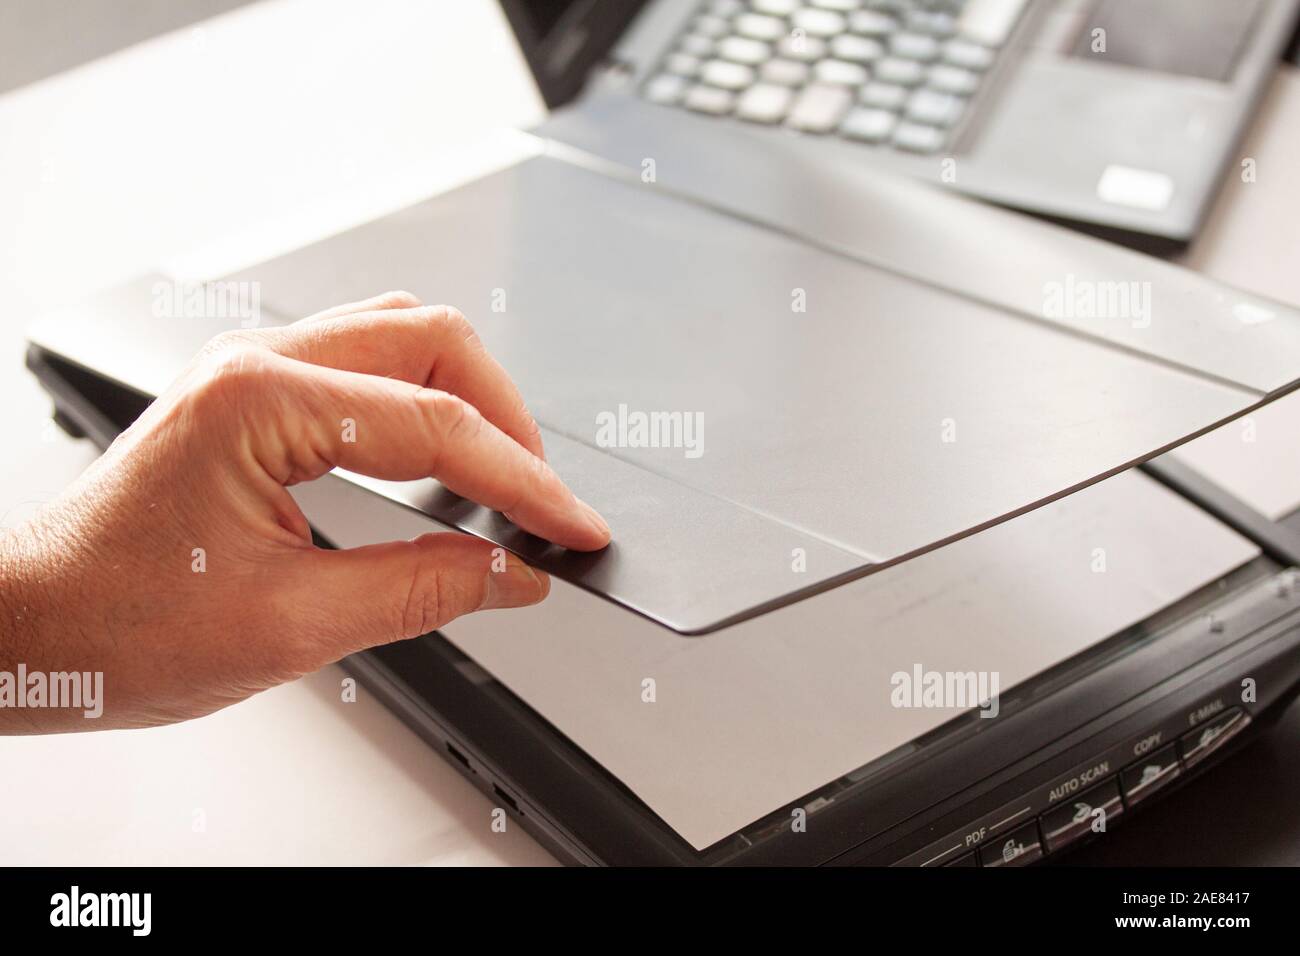 A hand closing a flatbed scanner with a laptop computer in the background.  Selective focus image Stock Photo - Alamy